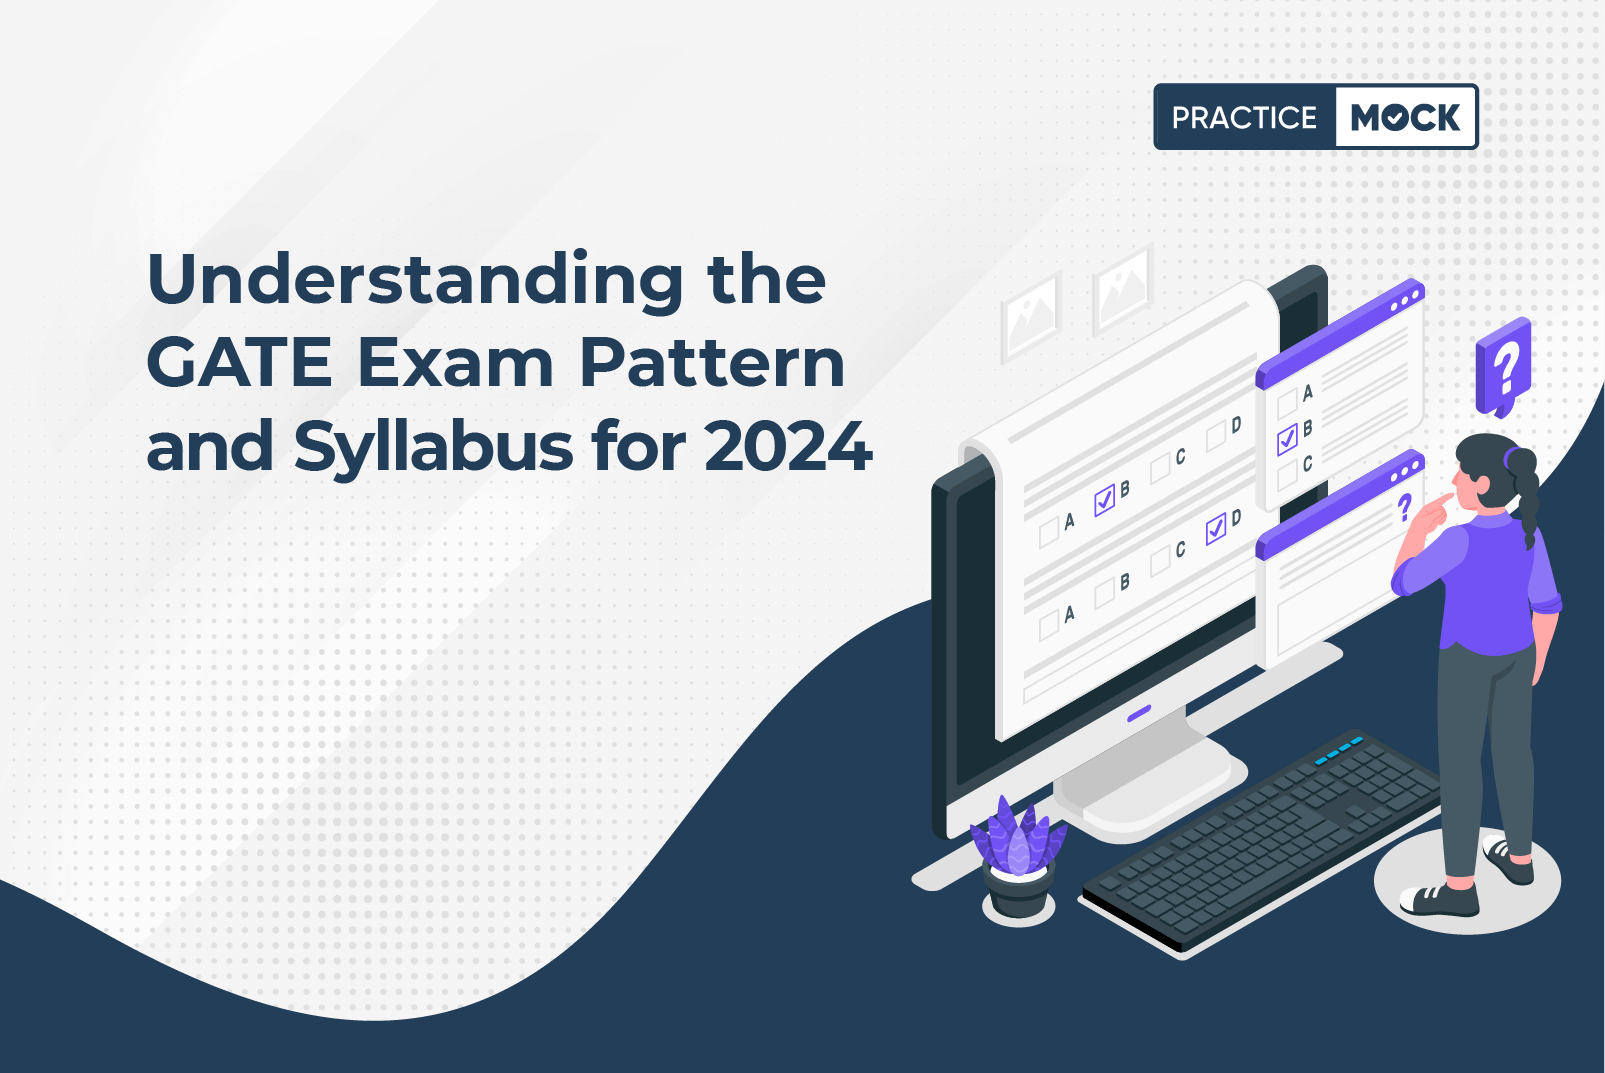 Understanding the GATE Exam Pattern and Syllabus for 2024 PracticeMock